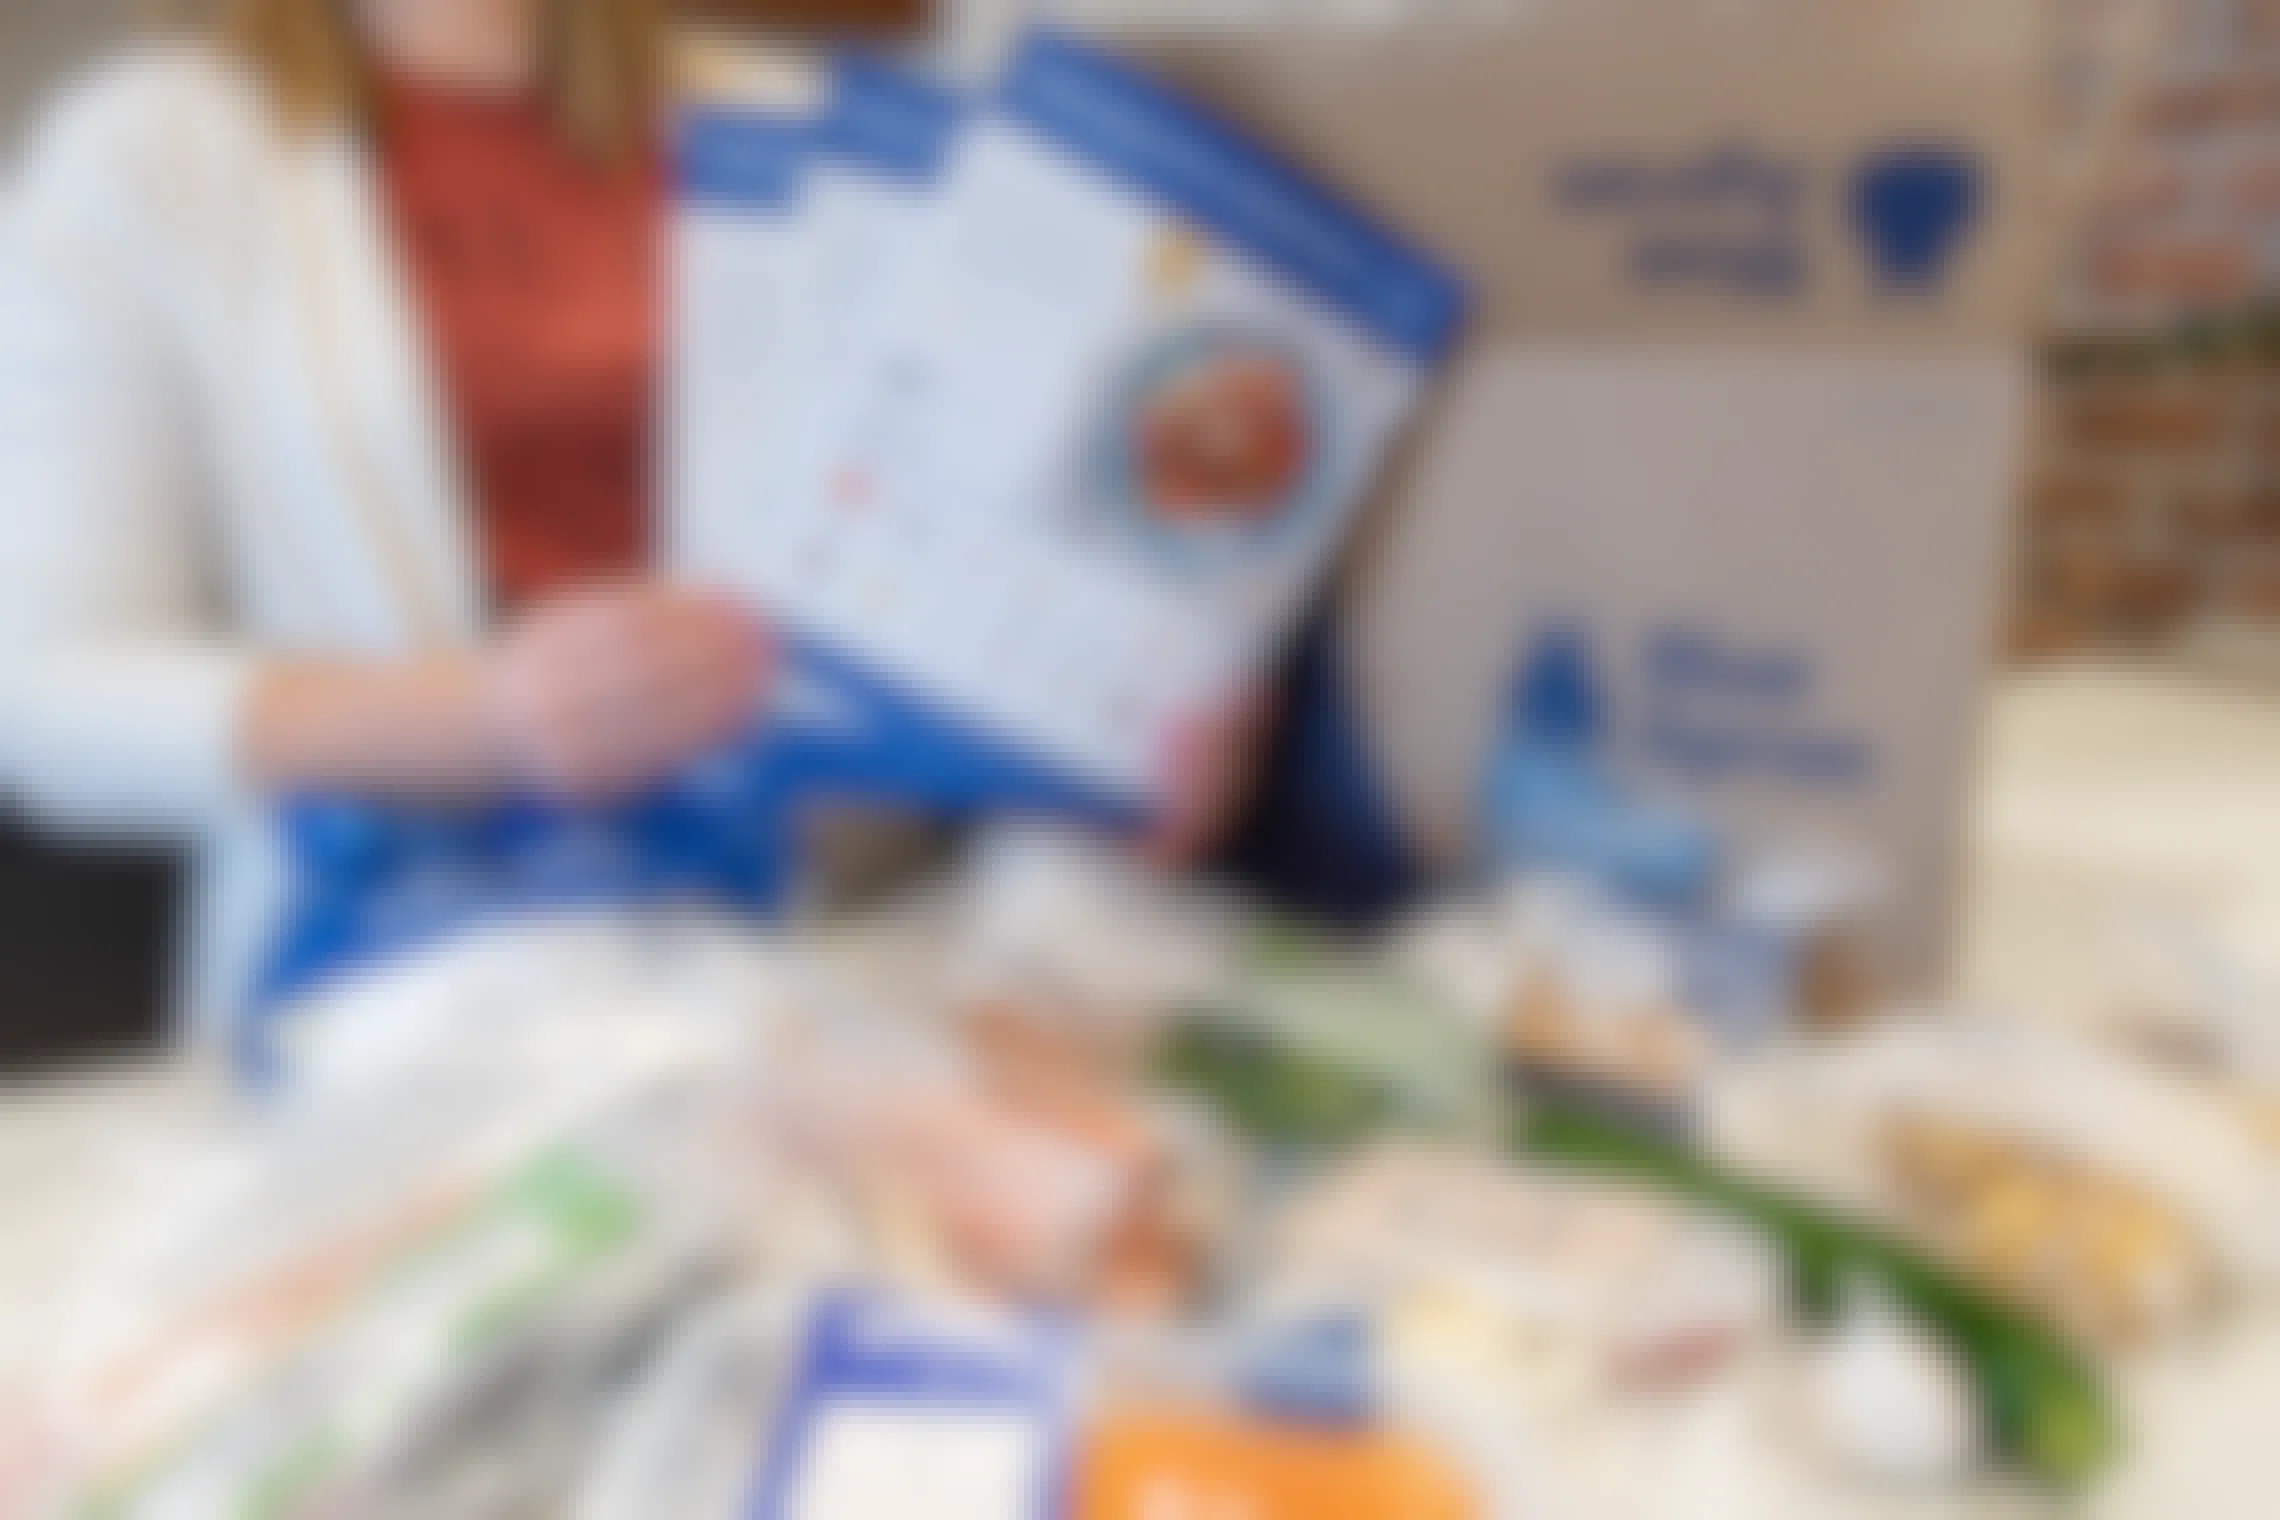 A woman holding the Blue Apron meal kit recipe cards next to the meal kit box and food.